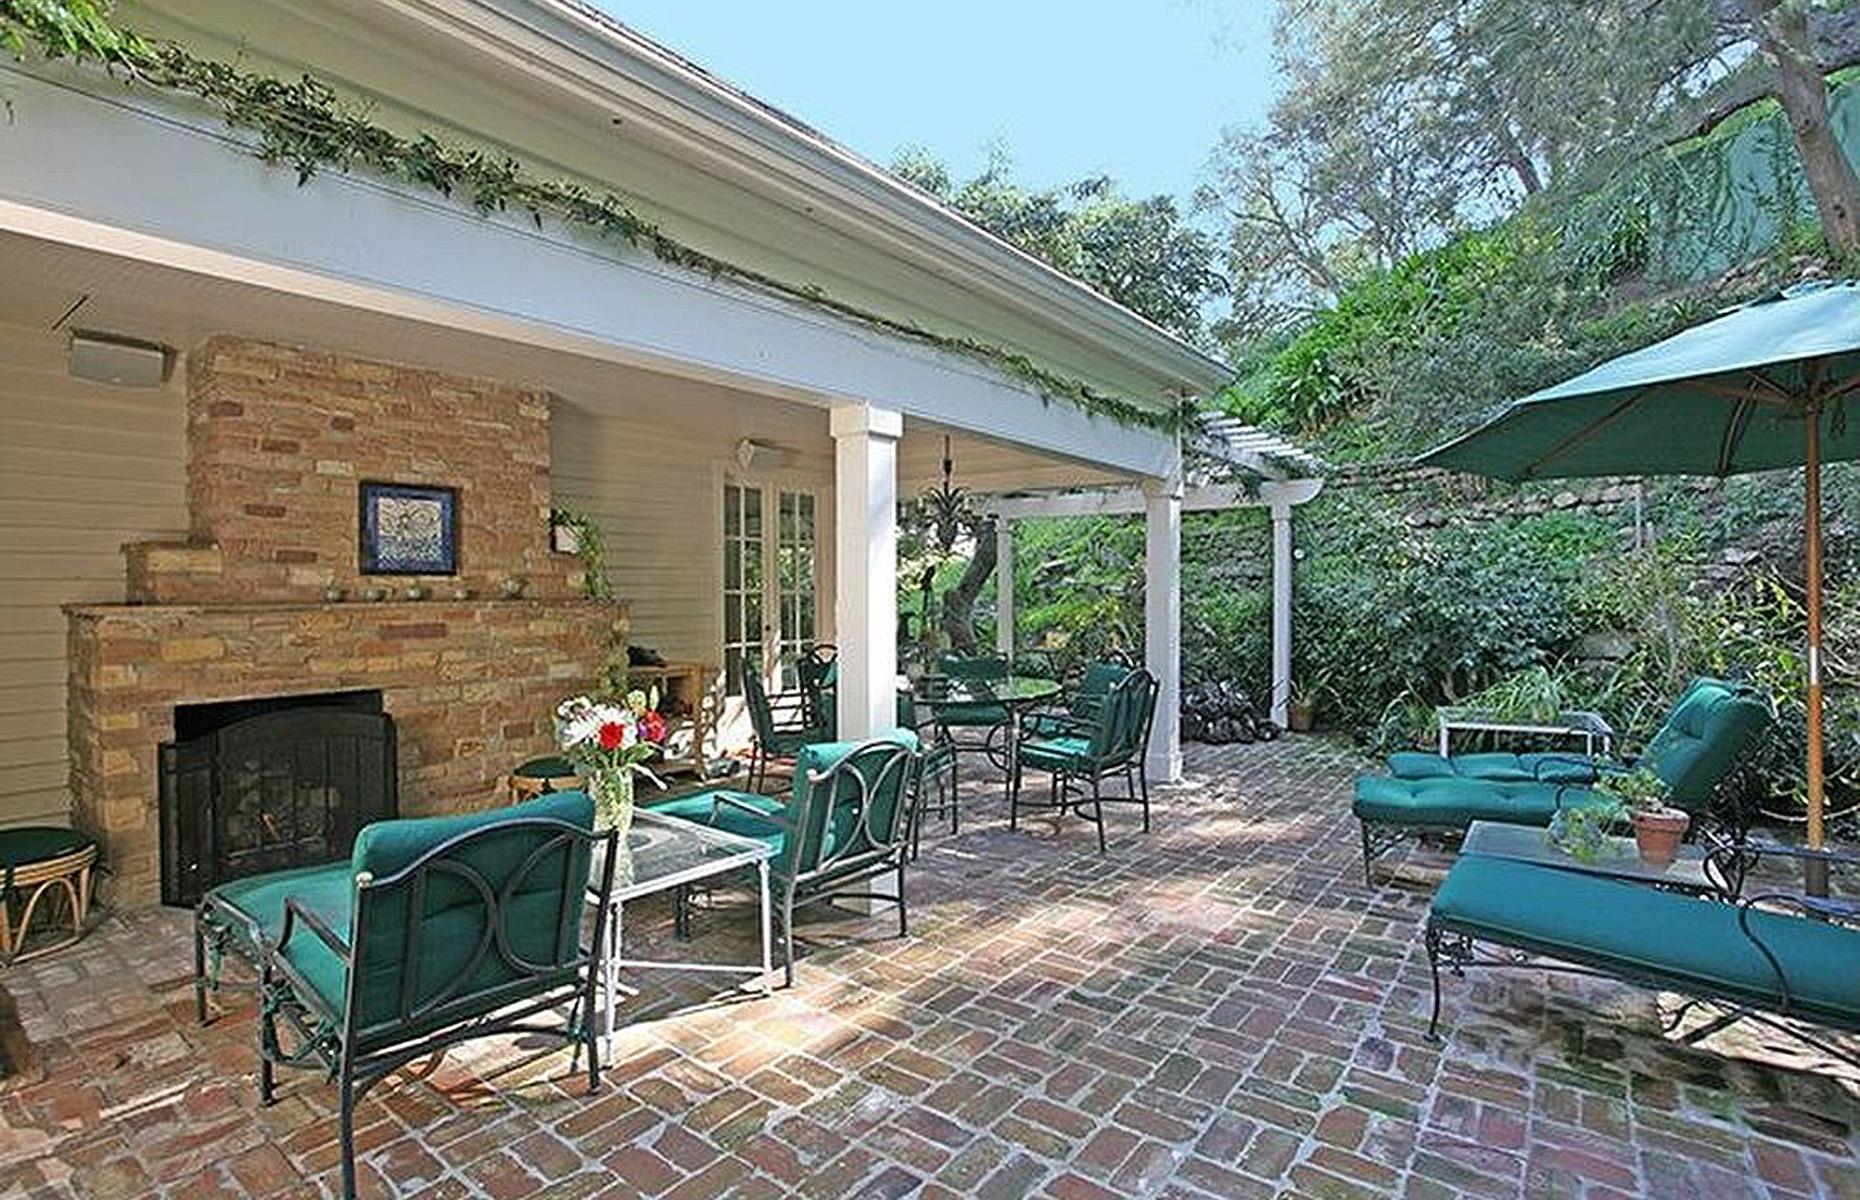 Taylor Swift's Cape Cod-style Beverly Hills home